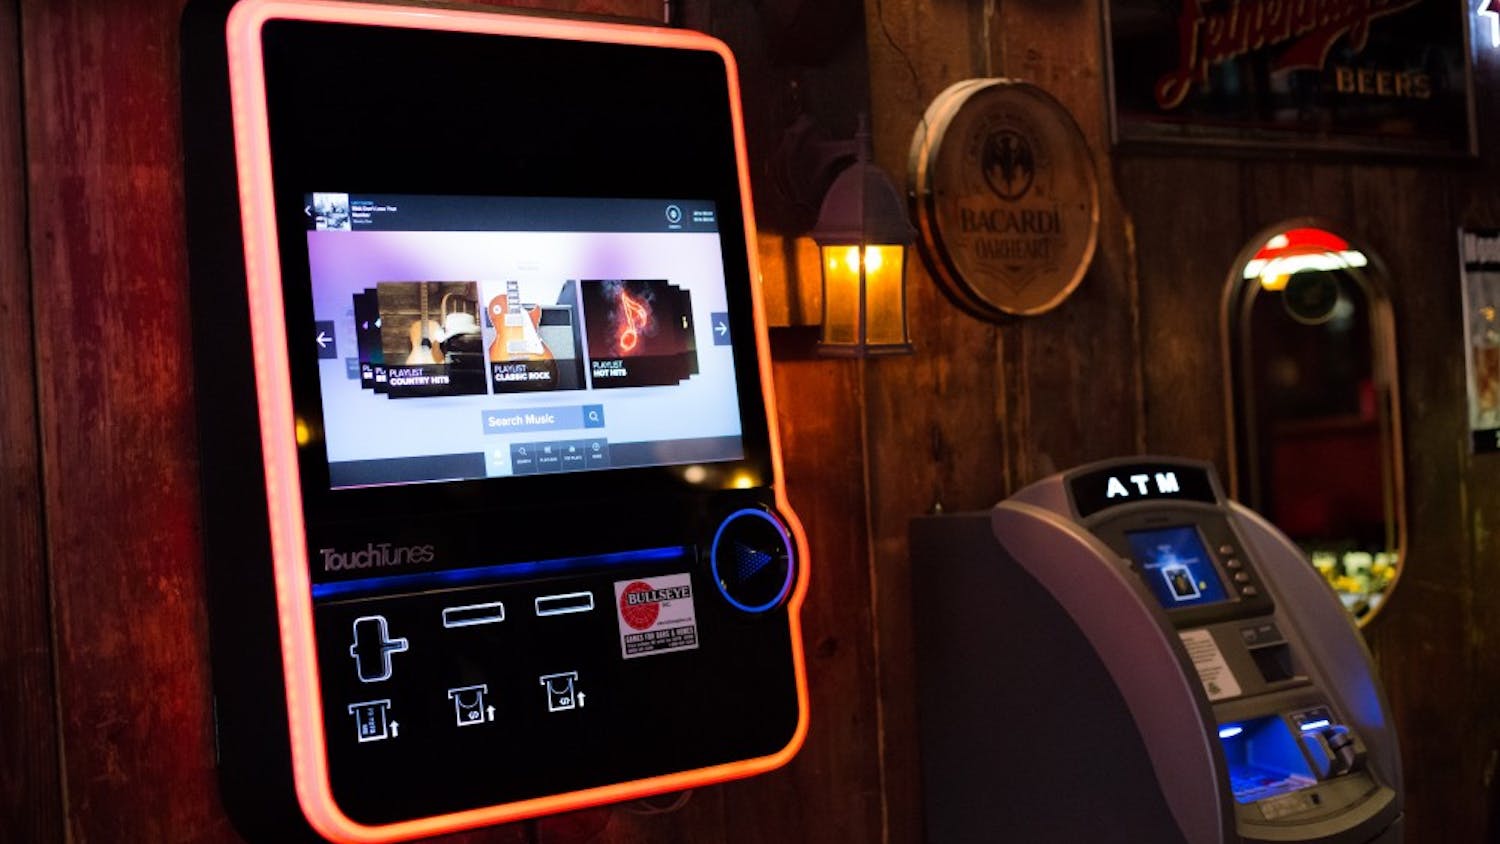 TouchTunes jukeboxes allow&nbsp;users to&nbsp;choose from thousands of songs, but&nbsp;hip-hop artists are&nbsp;unavailable on some in campus-area bars.